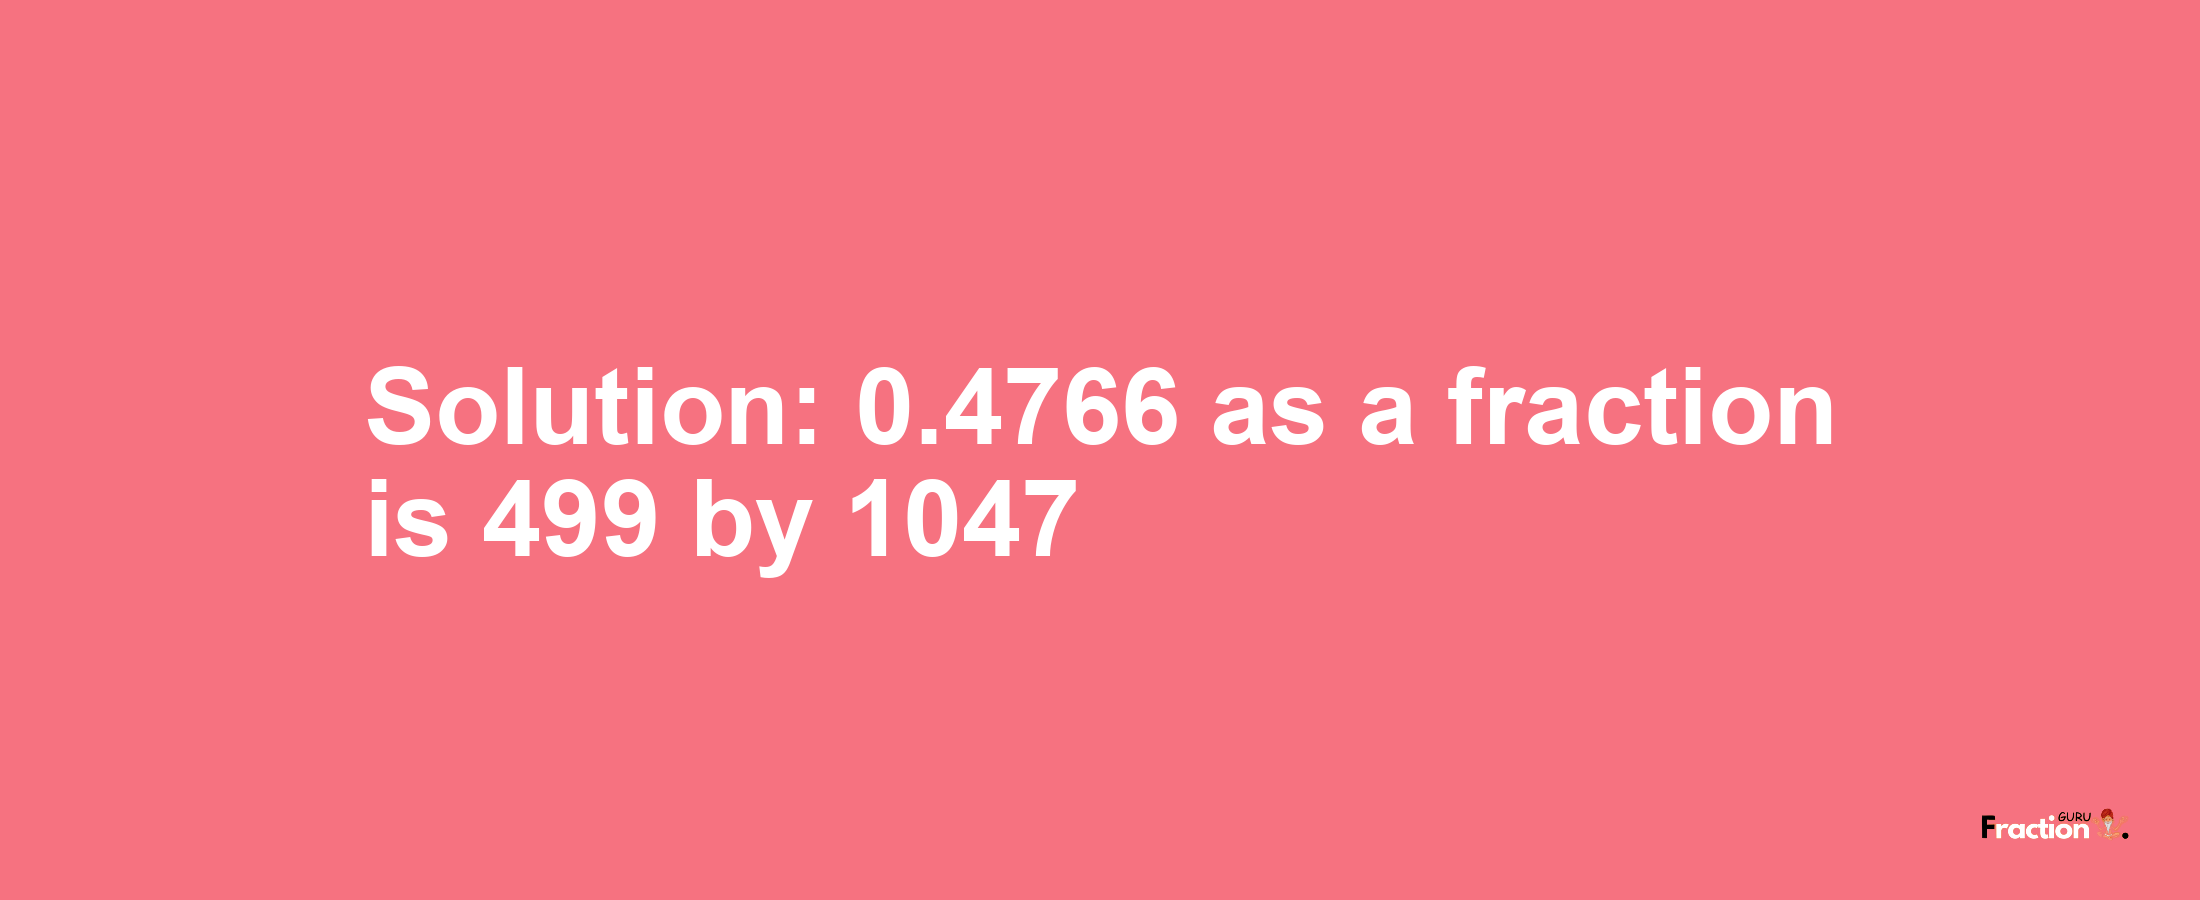 Solution:0.4766 as a fraction is 499/1047